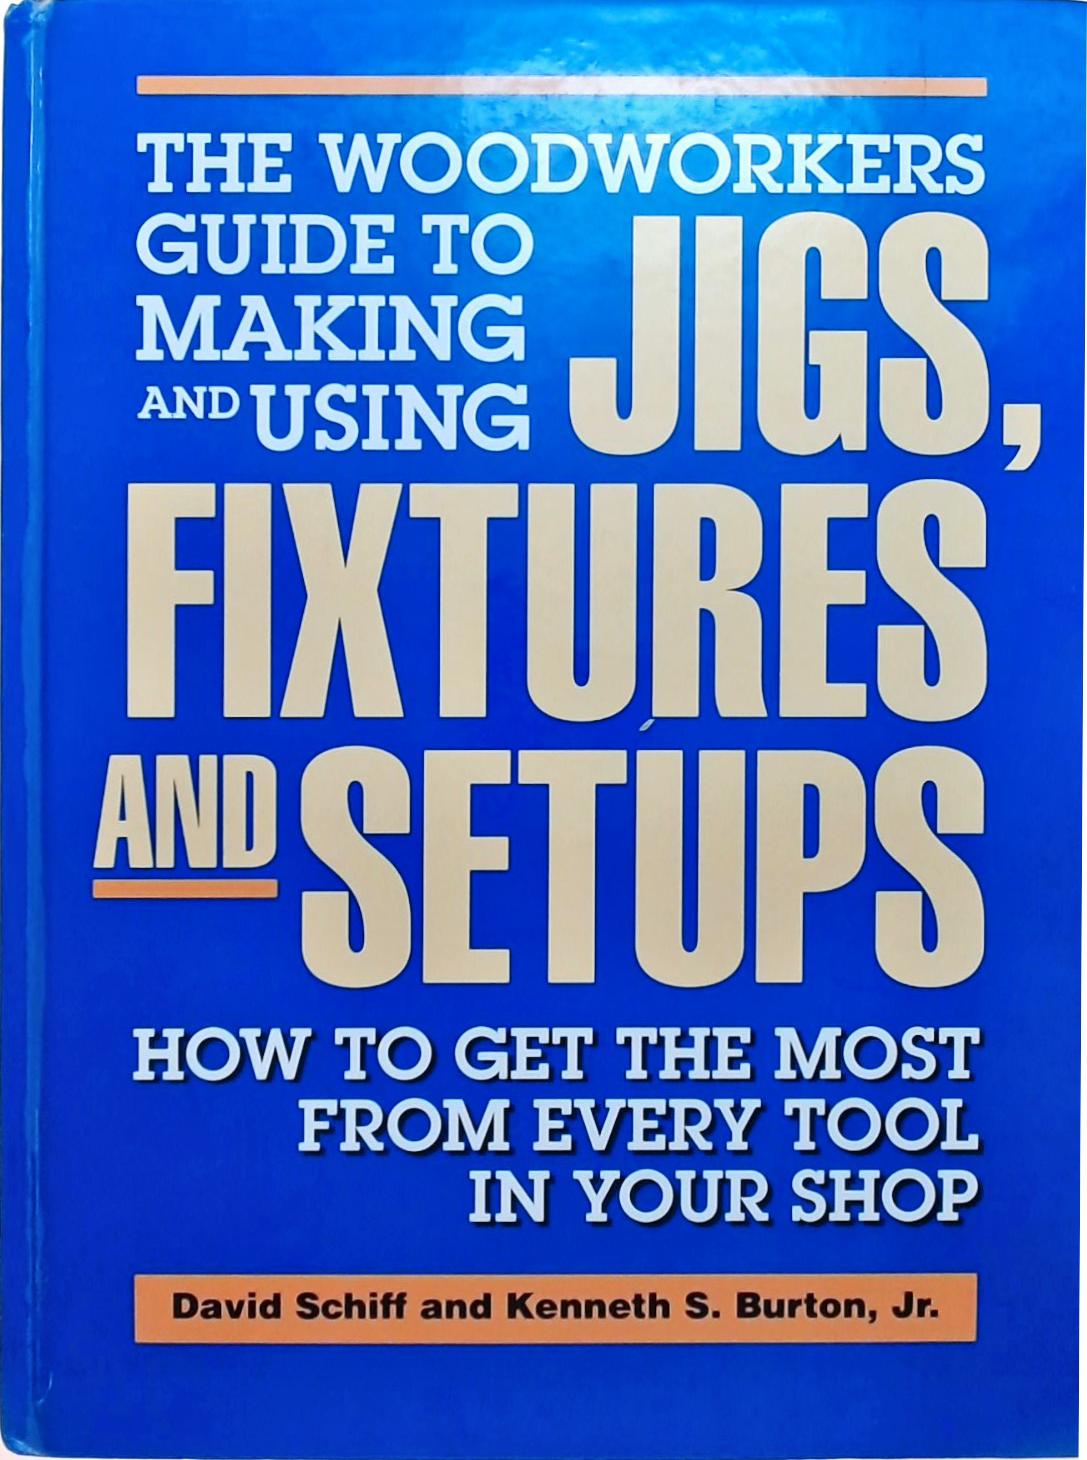 Woodworker's Guide To Making And Using Jigs, Fixtures, And Setups